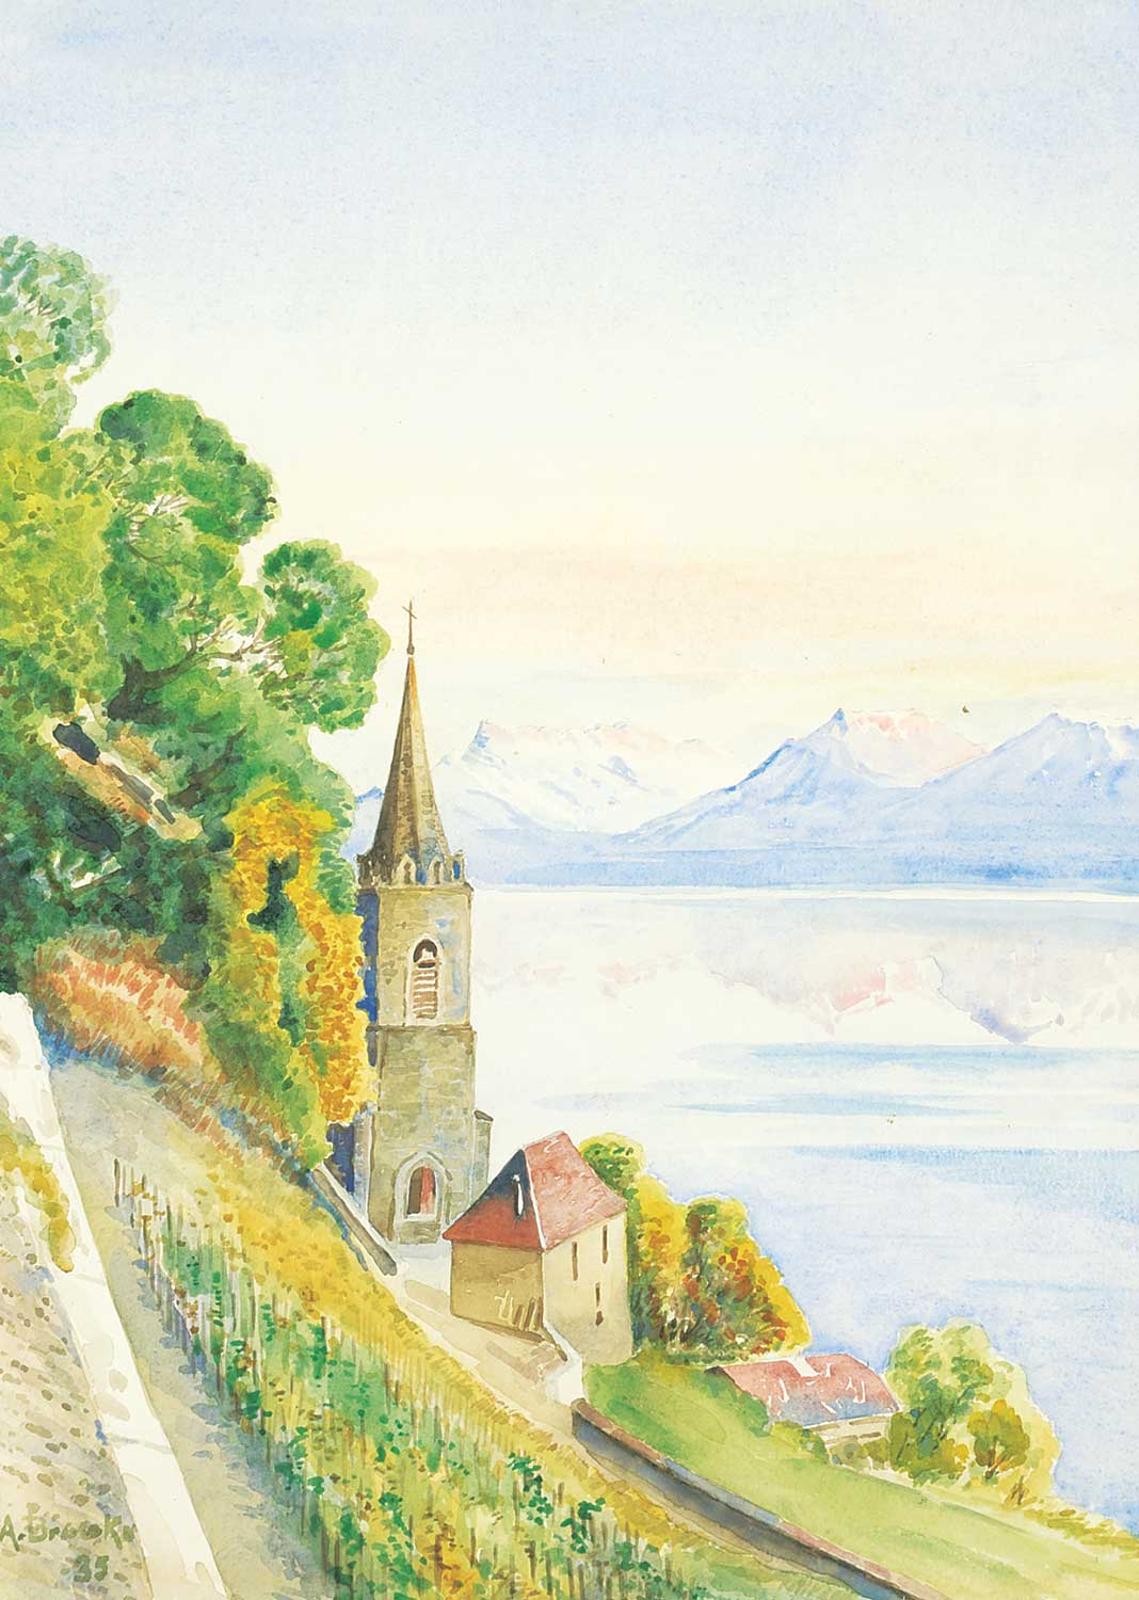 A. Brooks - Untitled - Church in the Alps